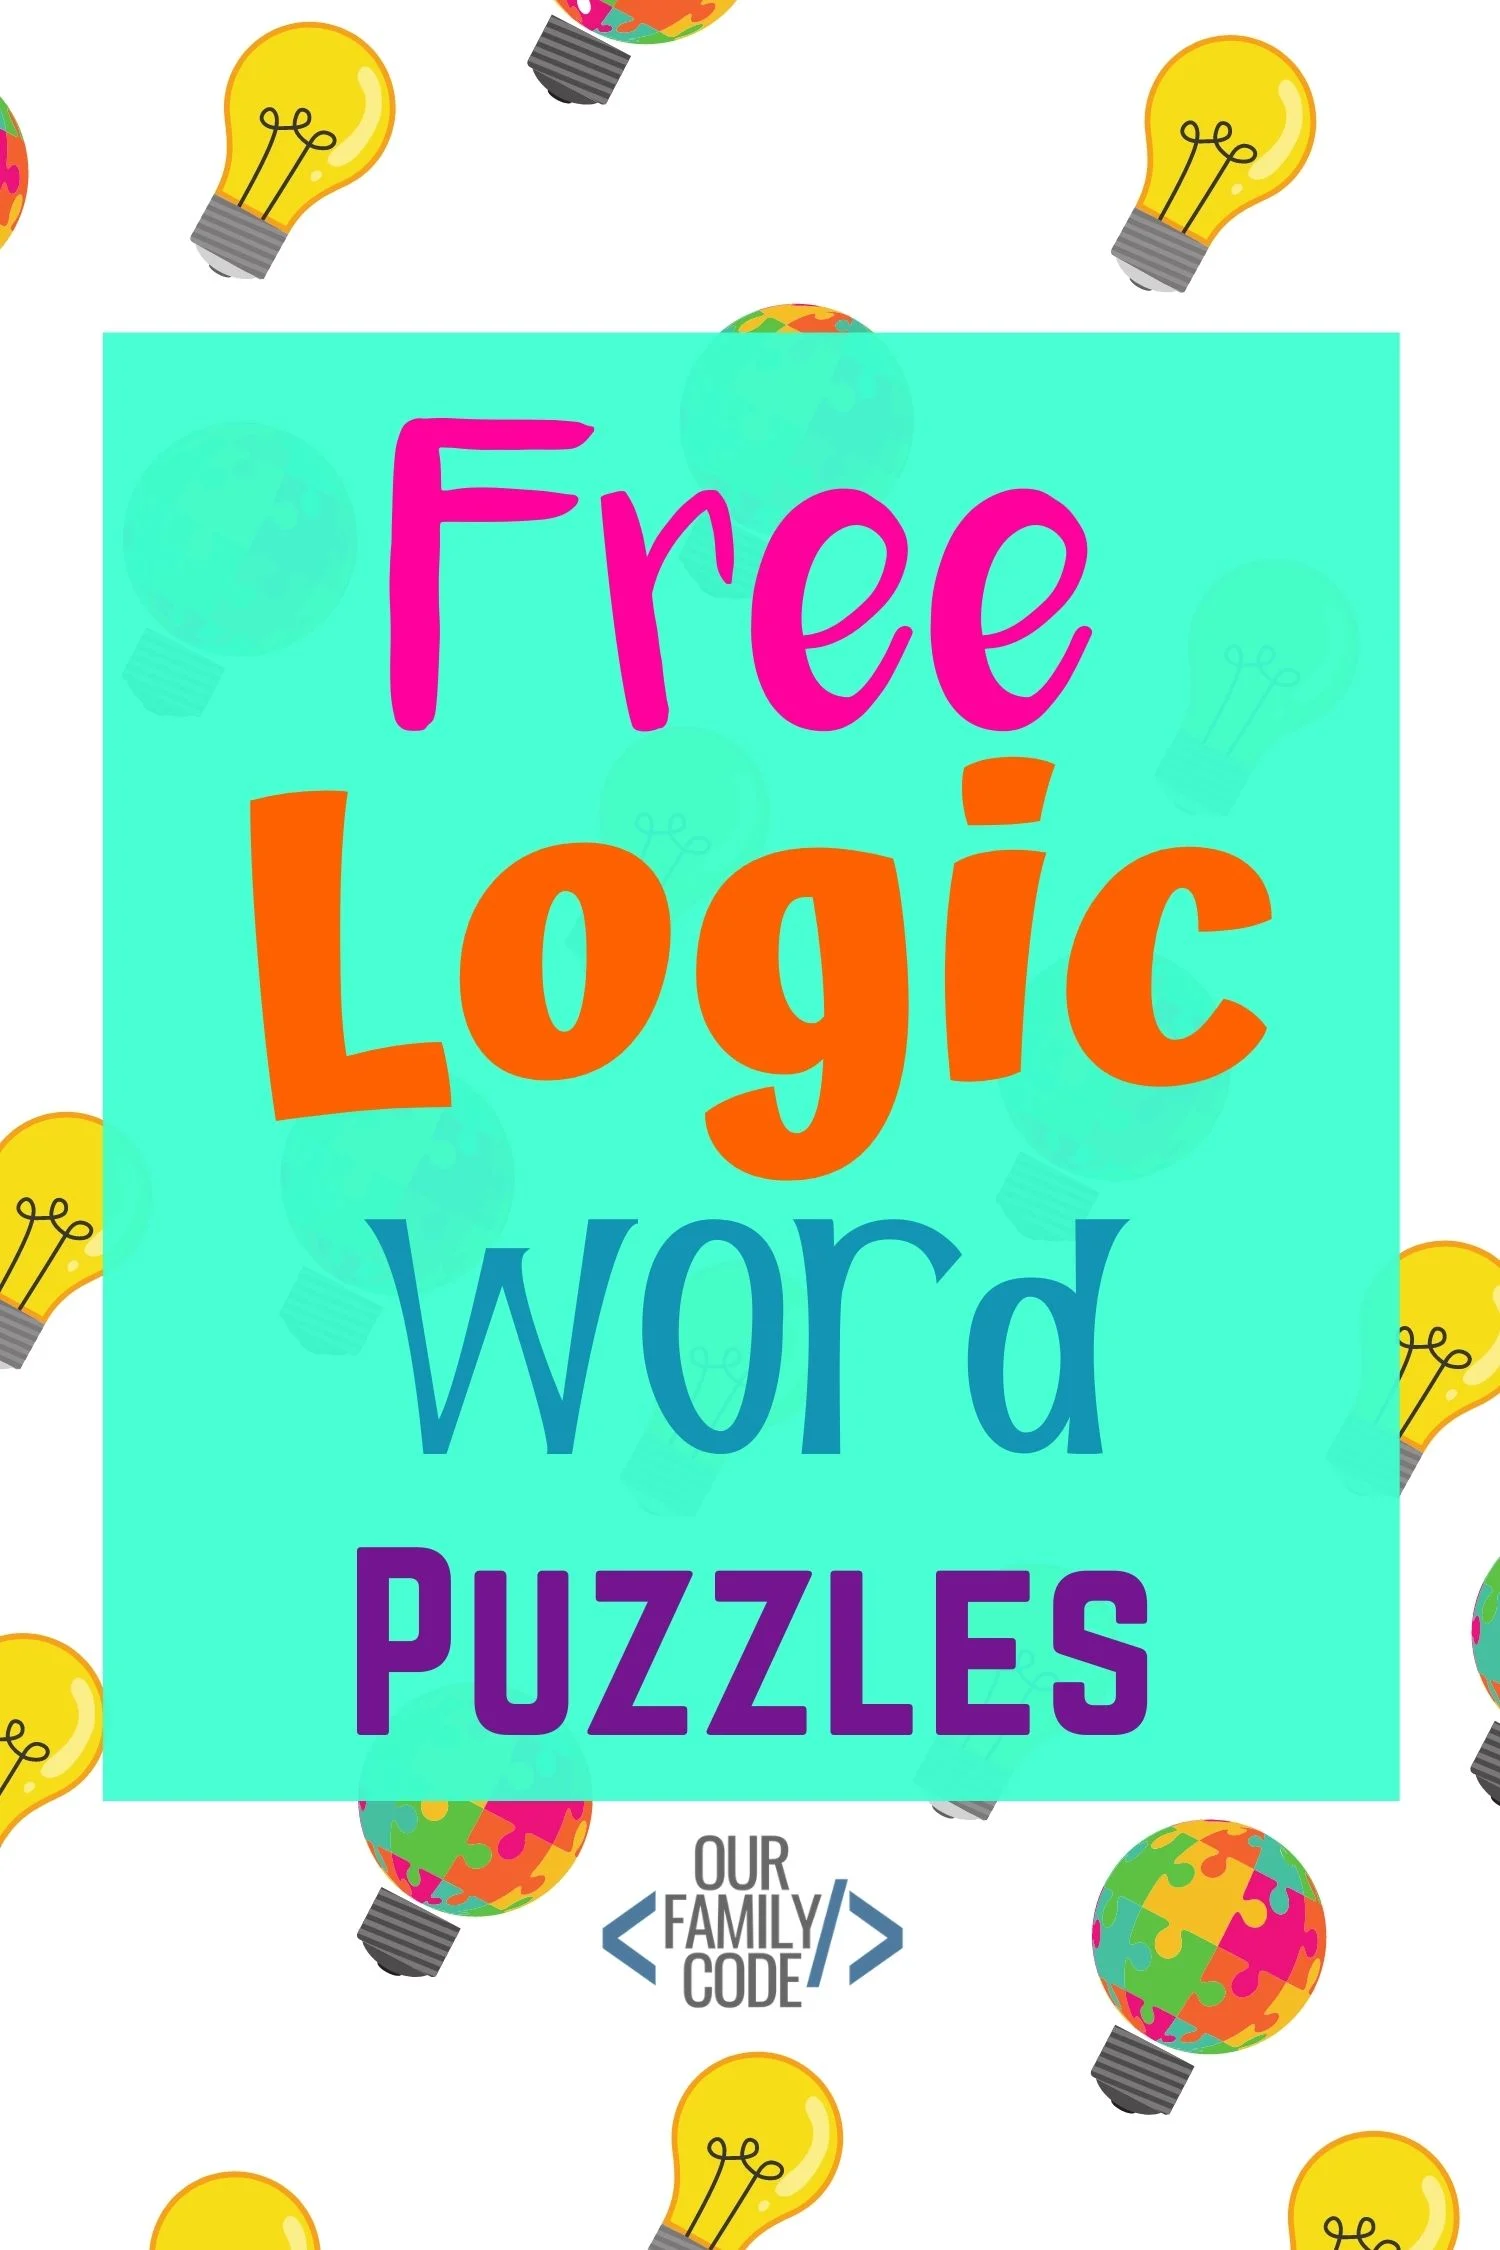 Free logic word puzzle printables - Logic word puzzles are a great way for kids to use logical thinking and pattern matching paired with spatial recognition and spelling. #teachkidstocode #computationalthinking #STEM #logicpuzzles